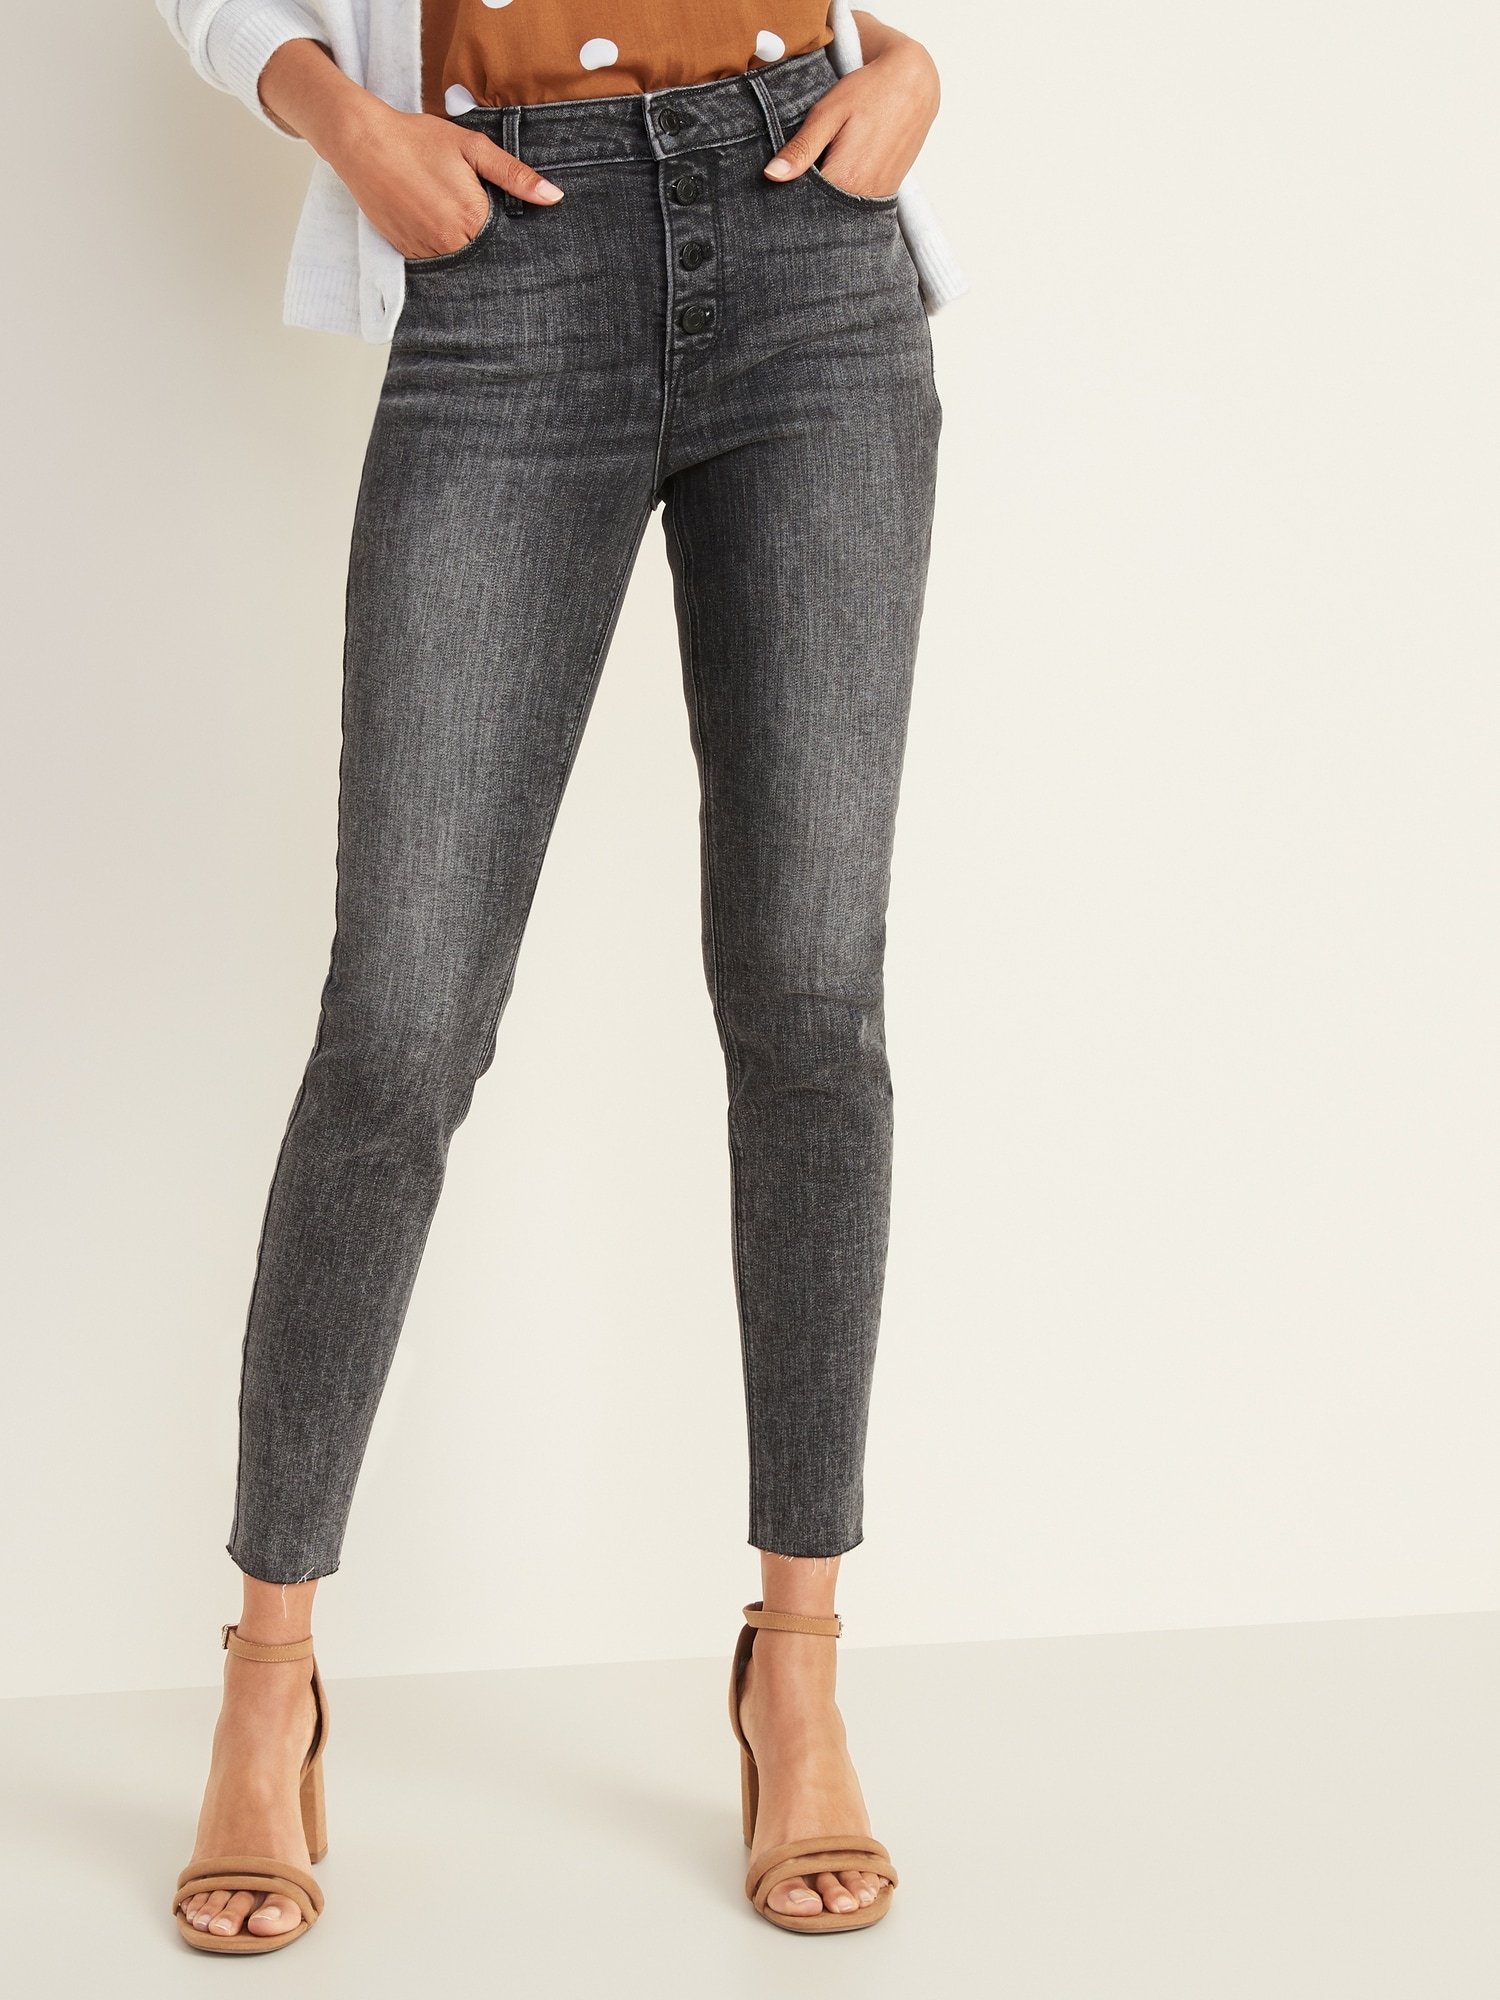 old navy womens jeans